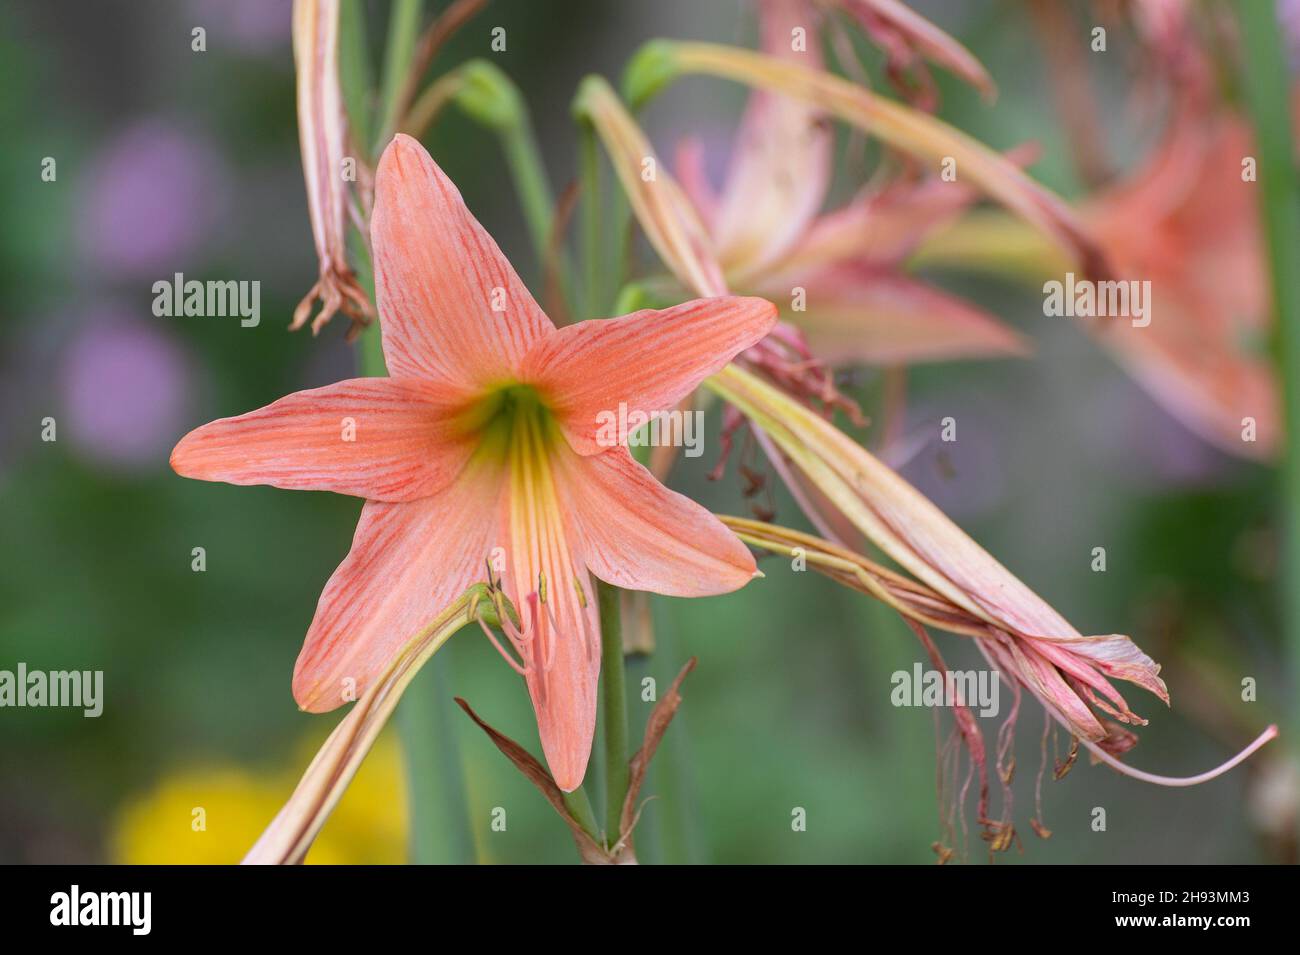 Pink Lily flowers, Lilium is a genus of herbaceous flowering plants growing from bulbs, all with large prominent flowers. Shot at Howrah, West Bengal, Stock Photo